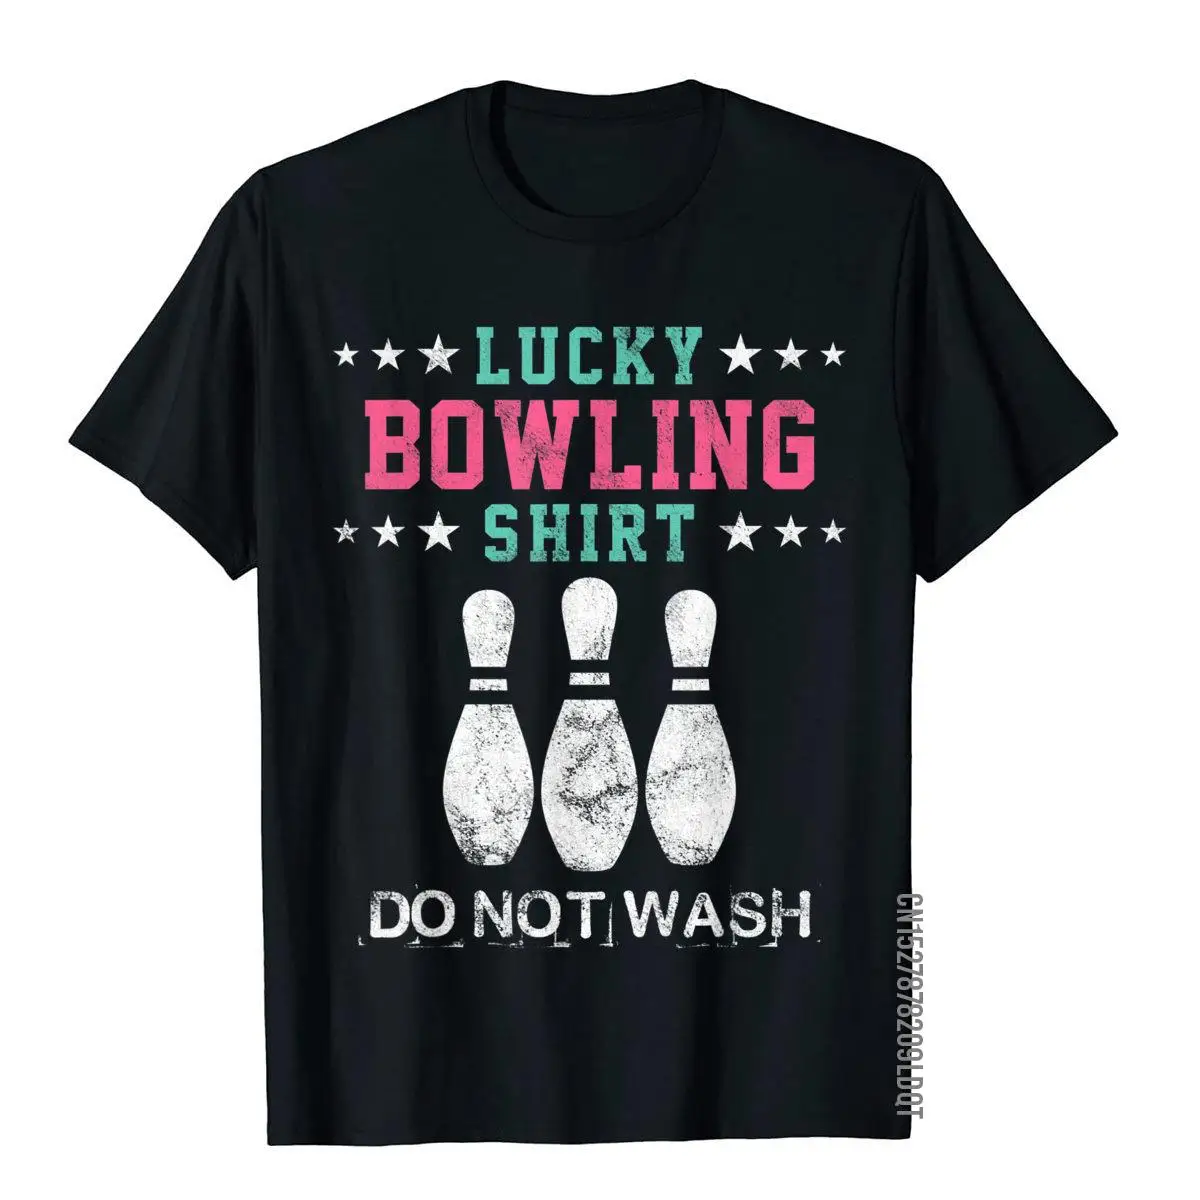 Lucky Bowling Gift T-Shirt For Women Wife Mom Or Girls__B10572black